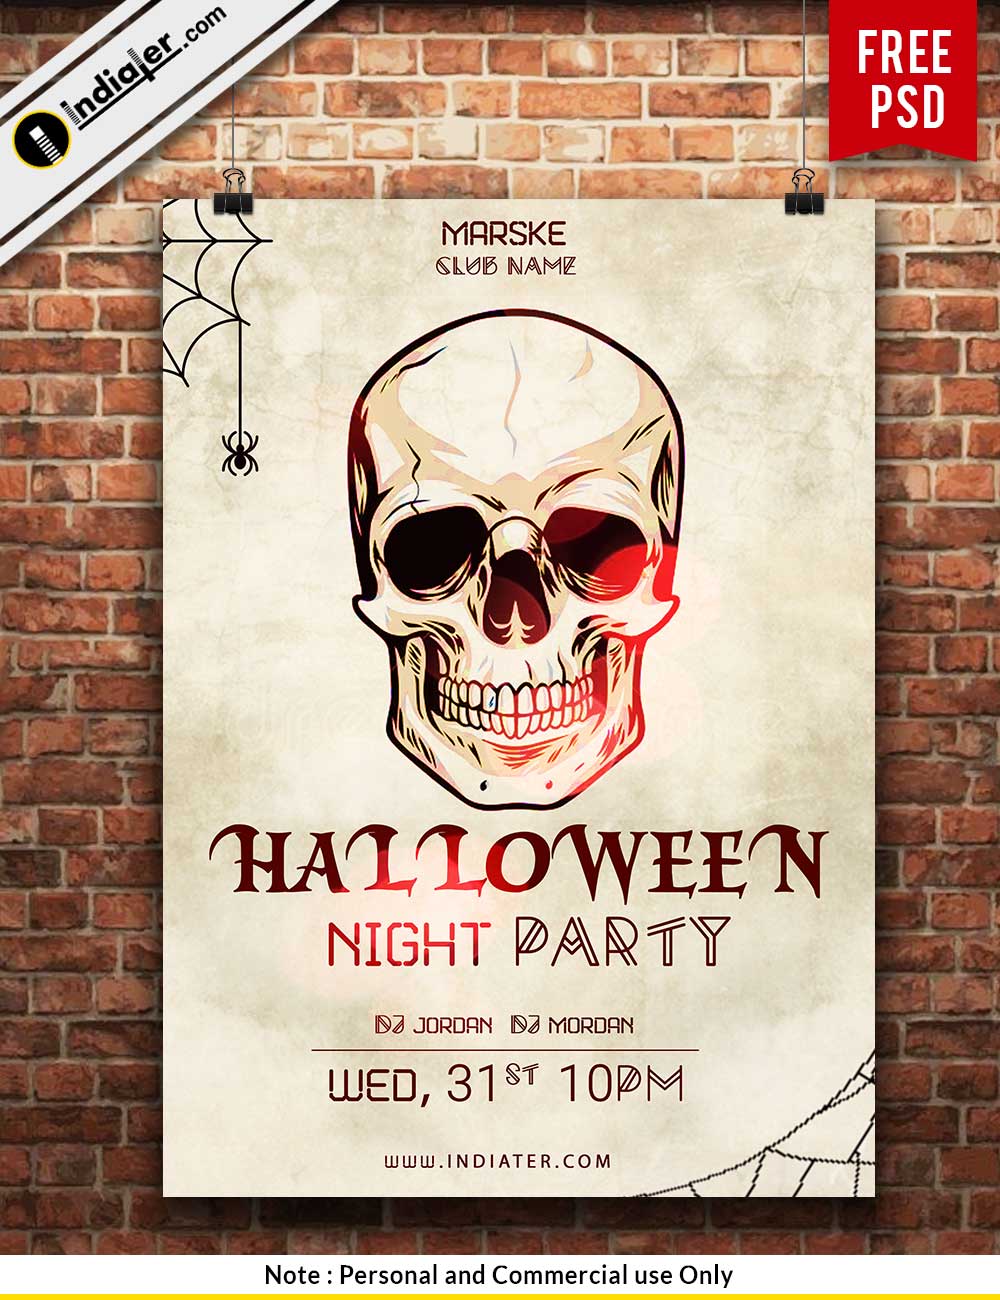 Free Scary Halloween Night Party Poster Design - Indiater